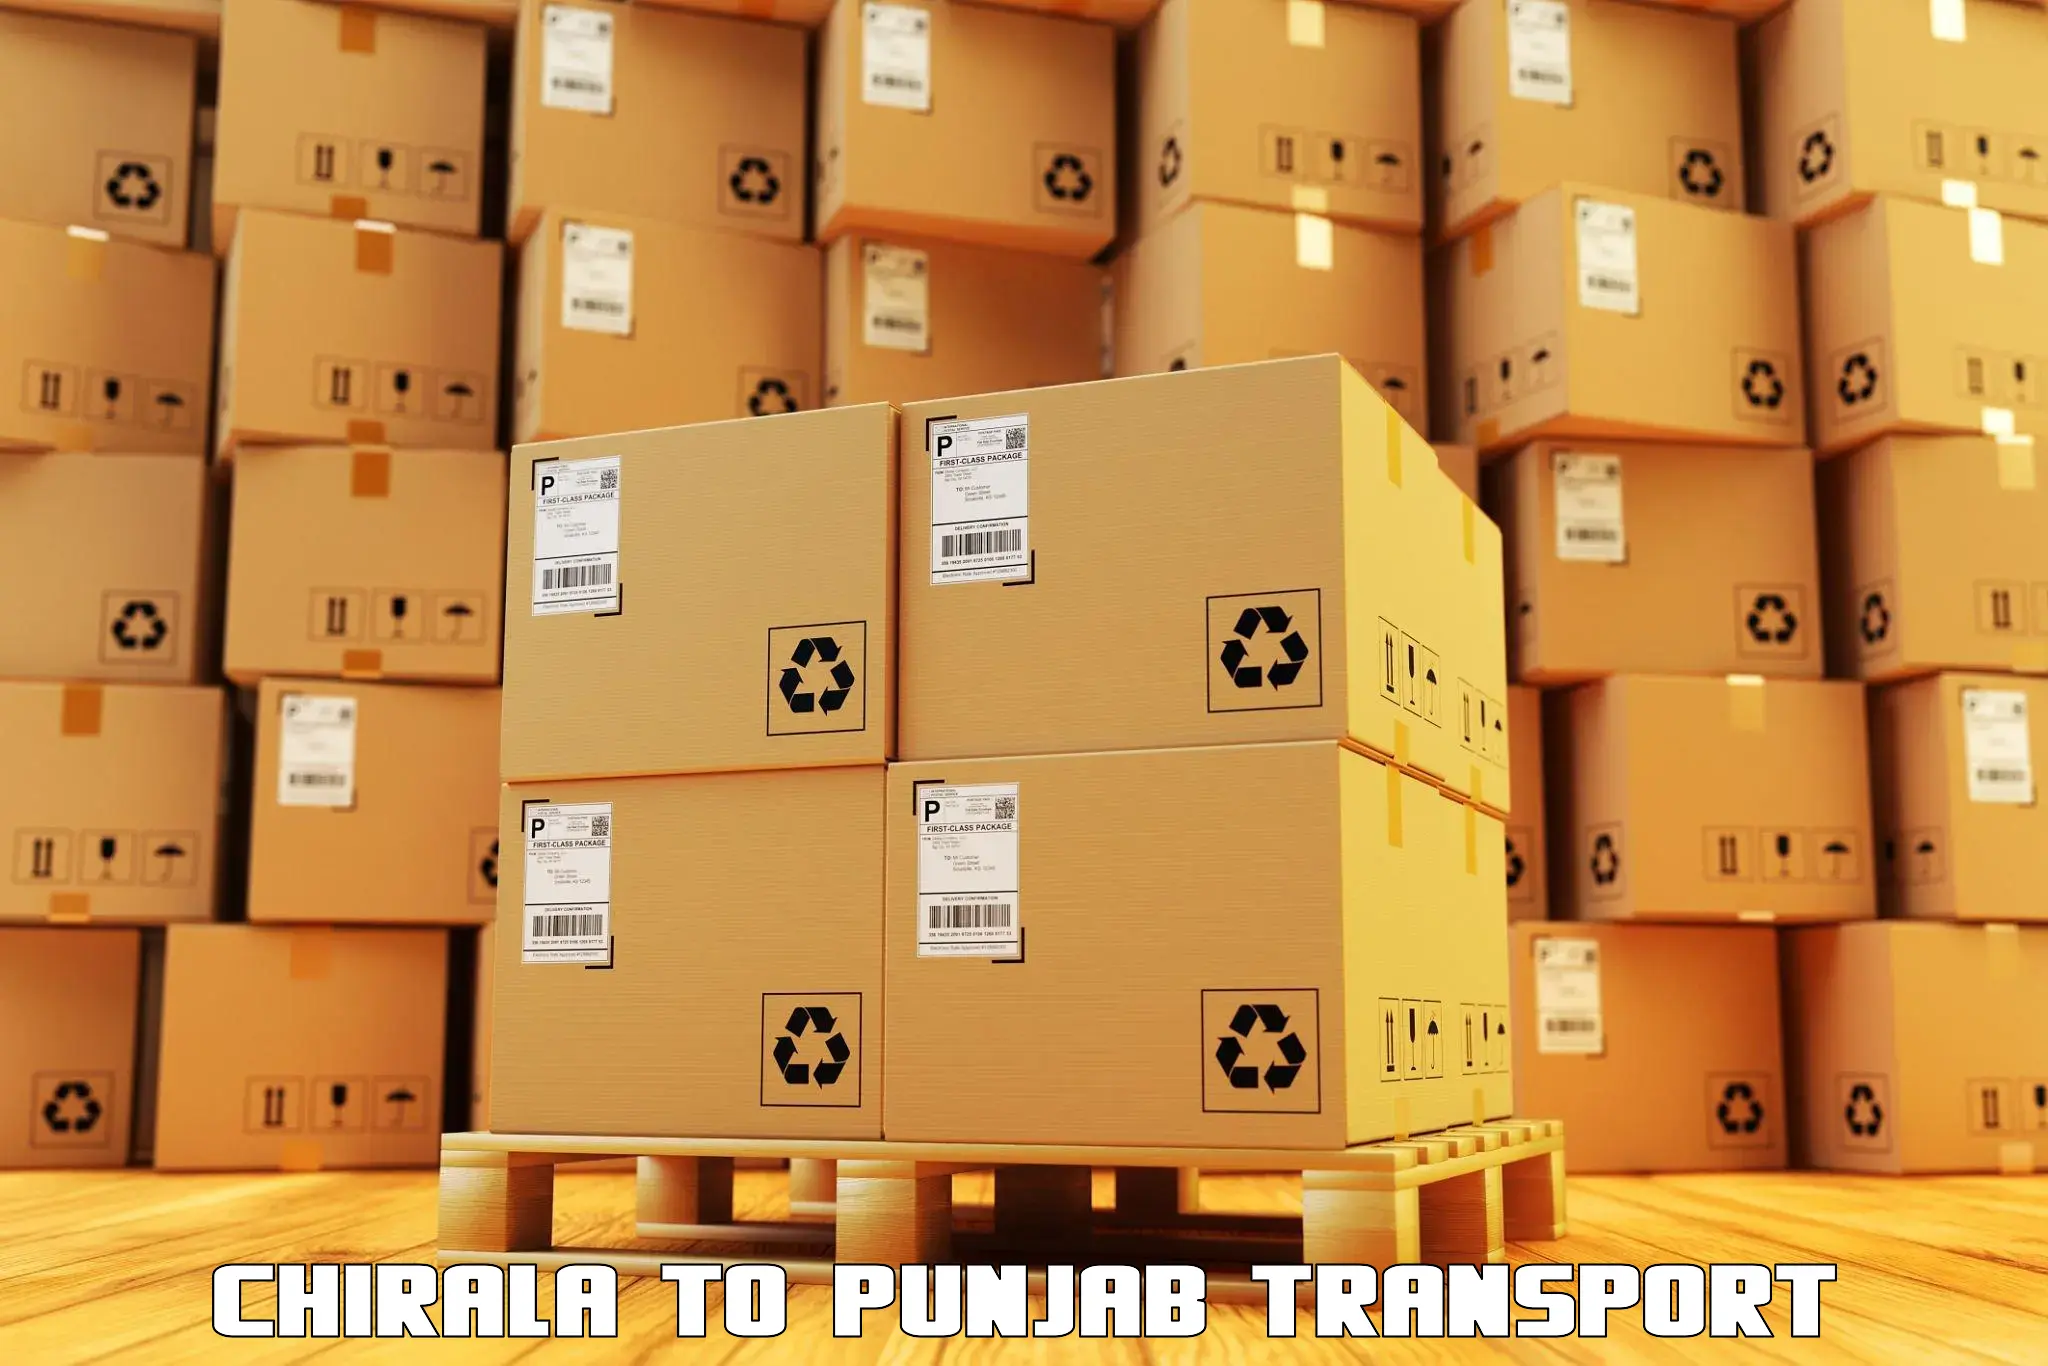 Commercial transport service Chirala to Talwara